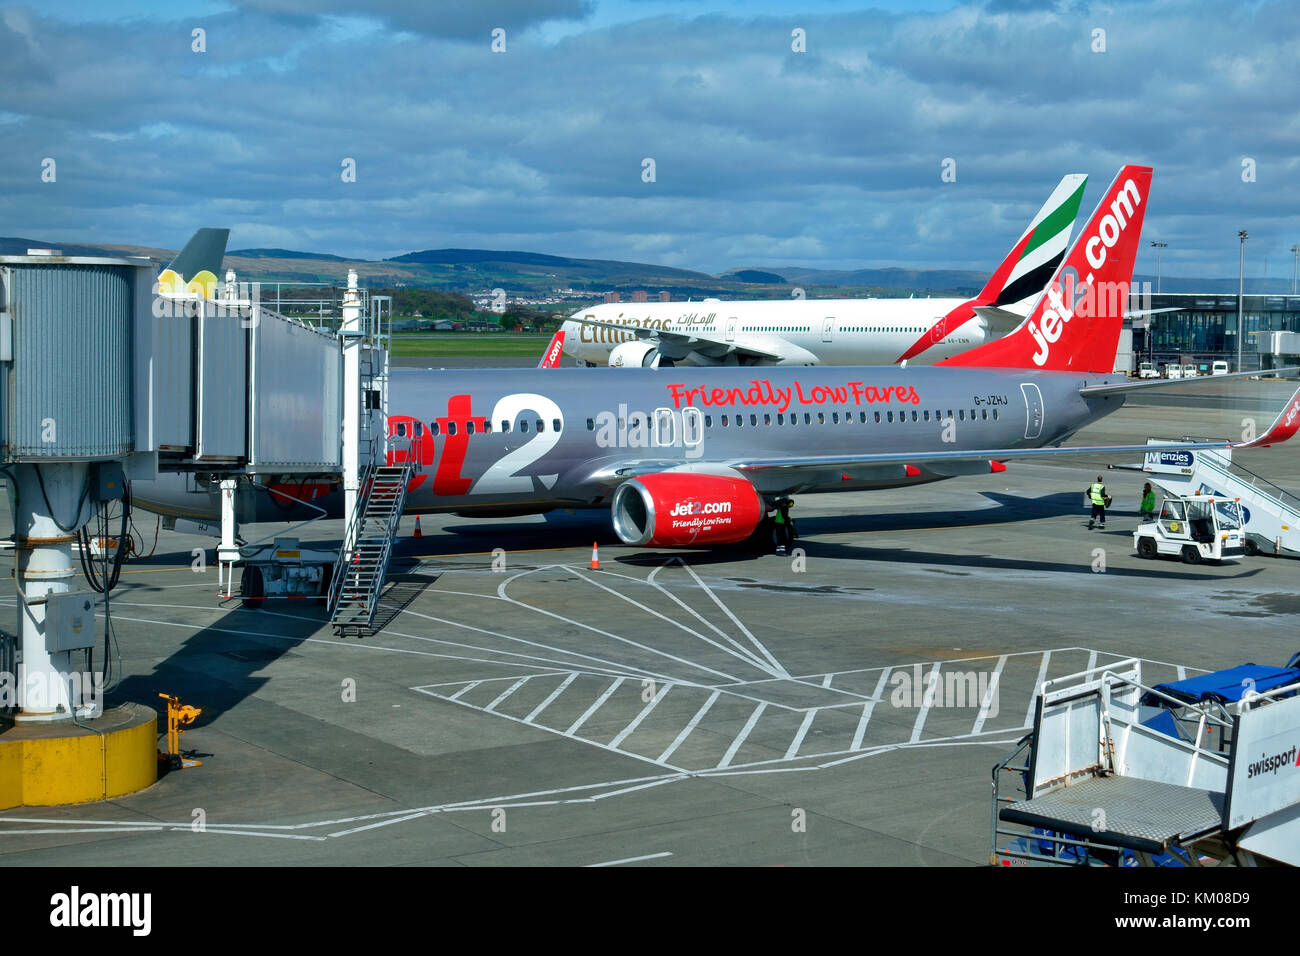 Jet2 and Emirates Aircraft at Glasgow Airport, Scotland Stock Photo